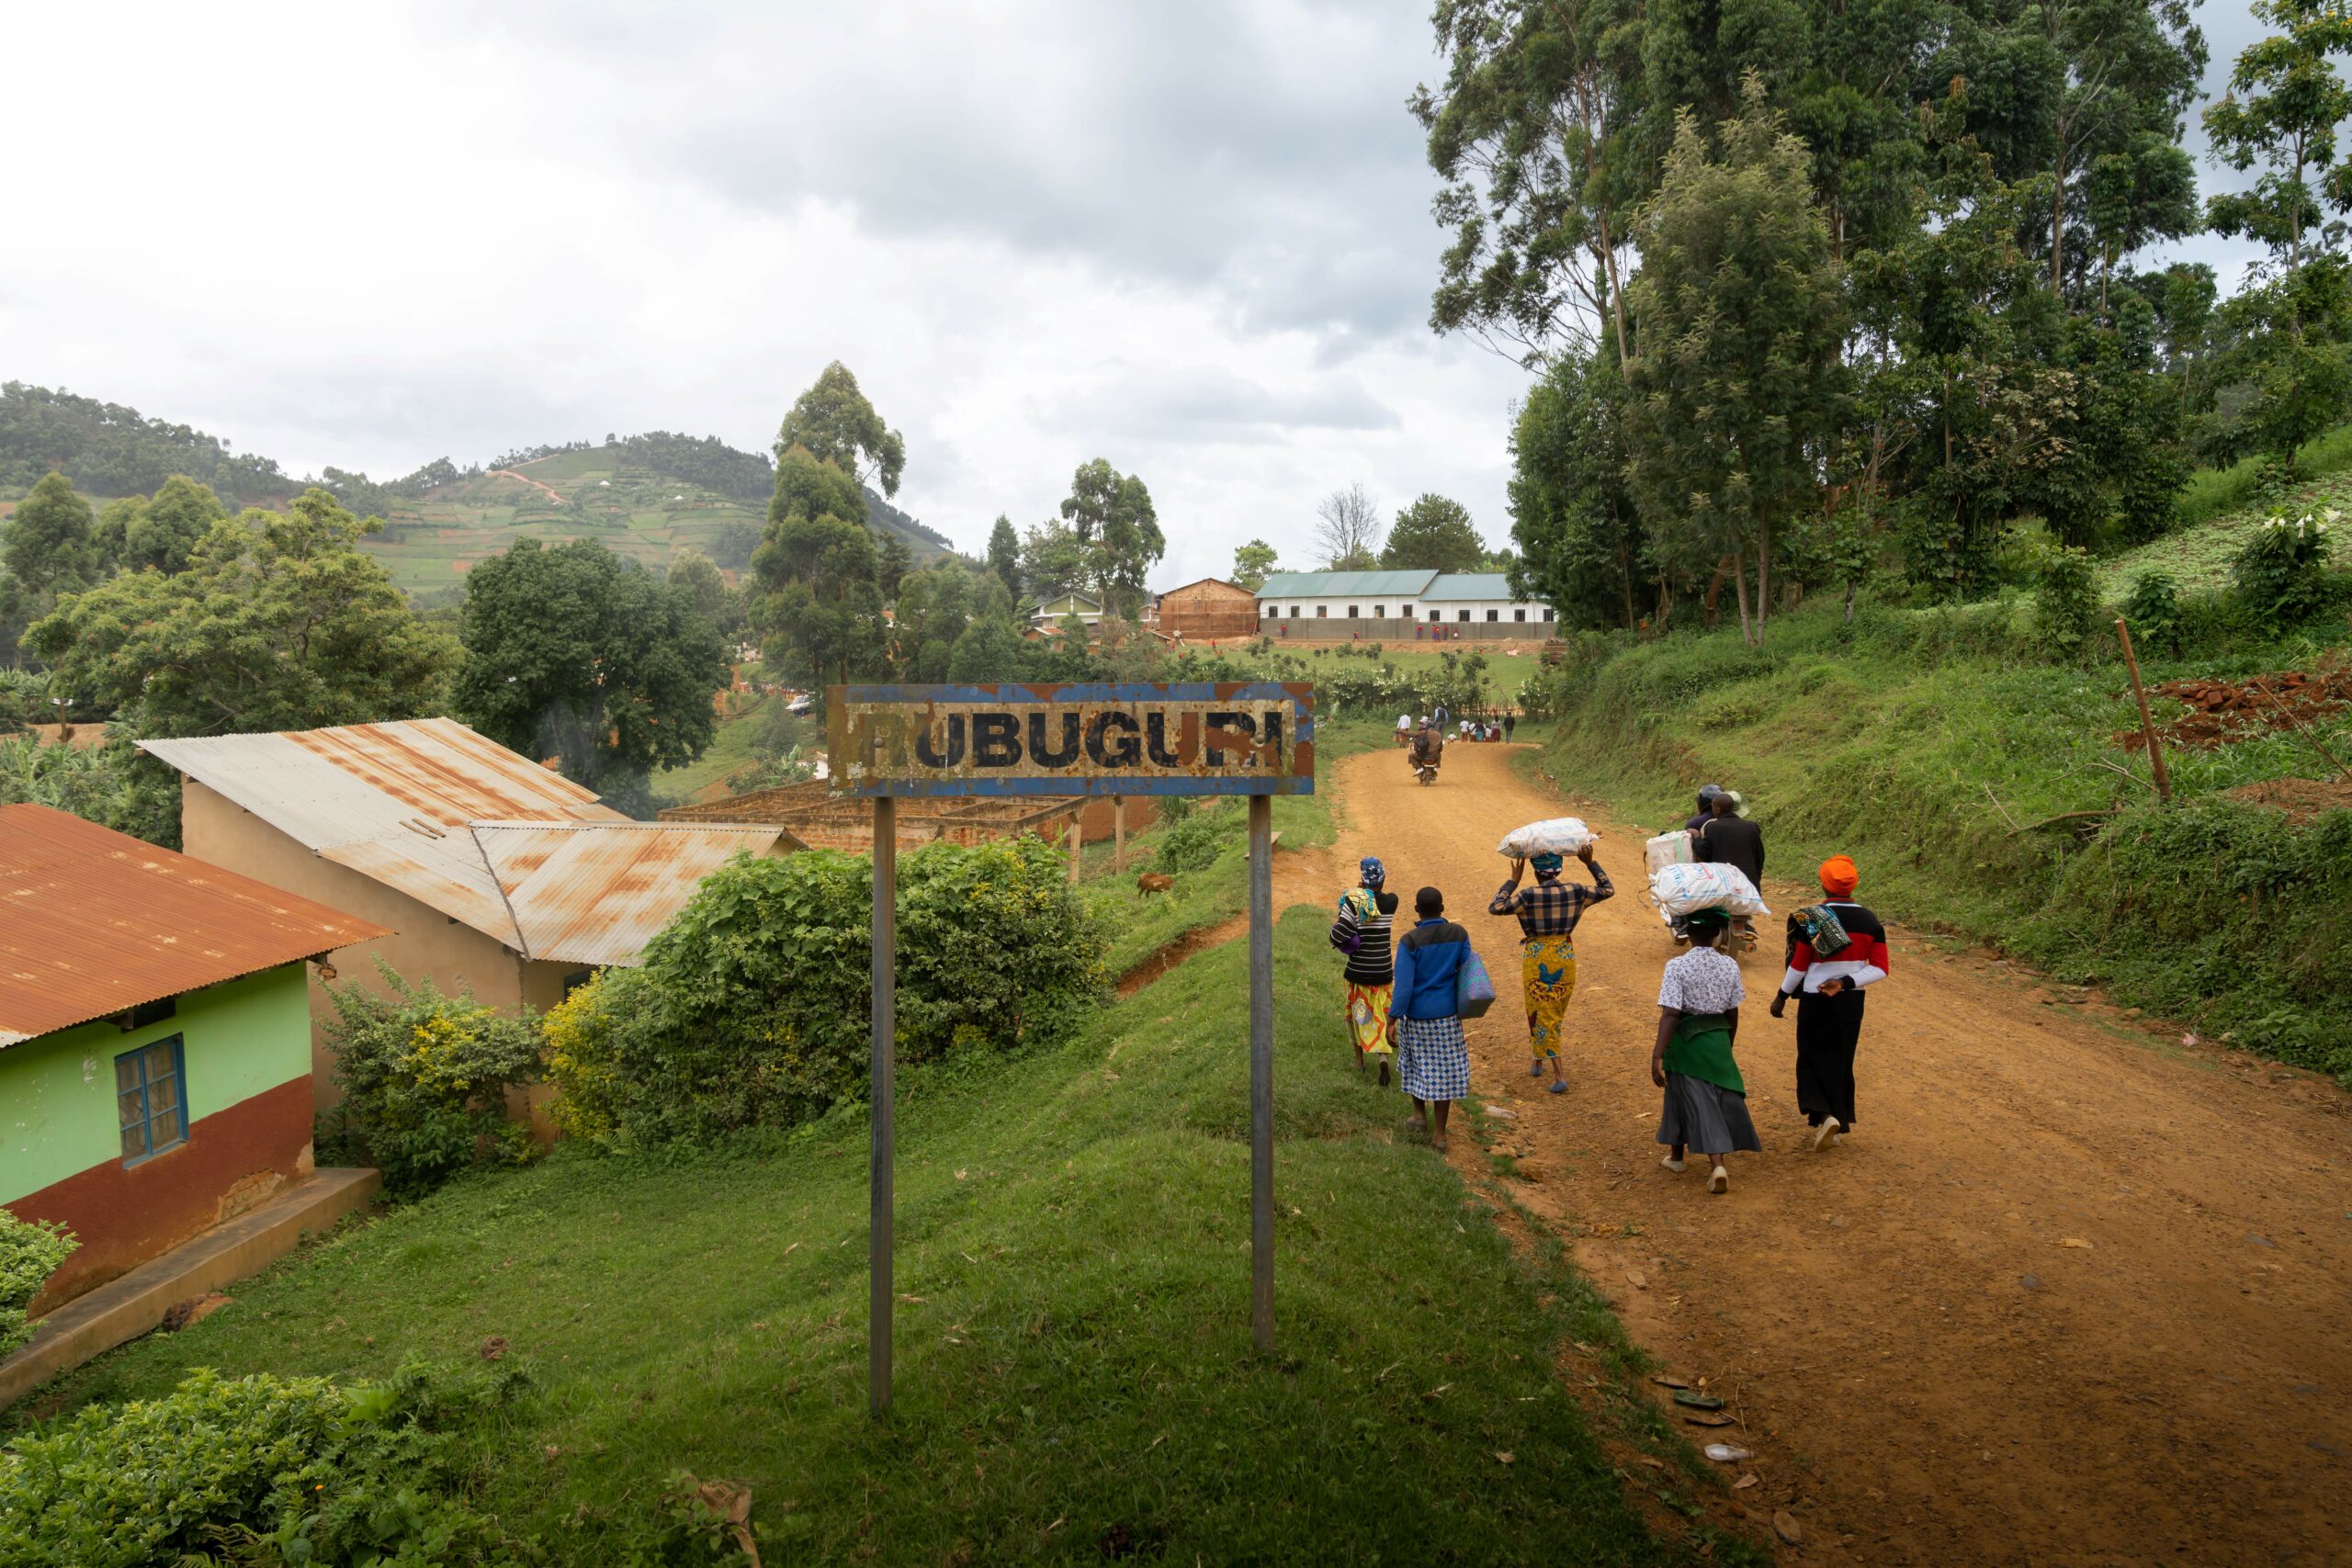 alt="image of locals walking on a road with a Rubuguri sign on the side of the road"